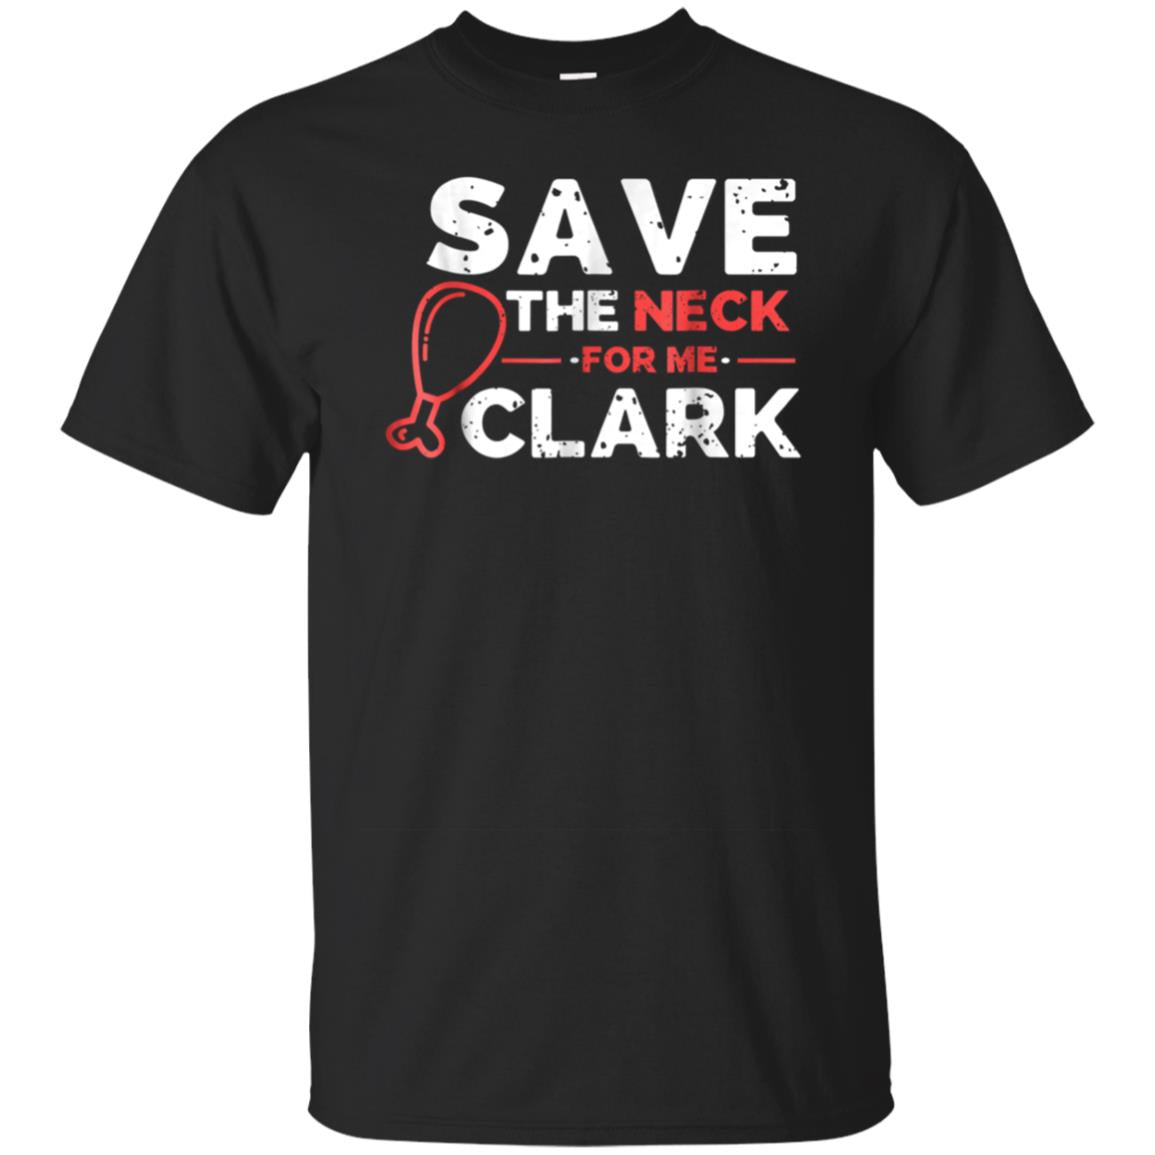 Save The Neck For Me Clark Shirt Funny Thanksgiving Tshirt